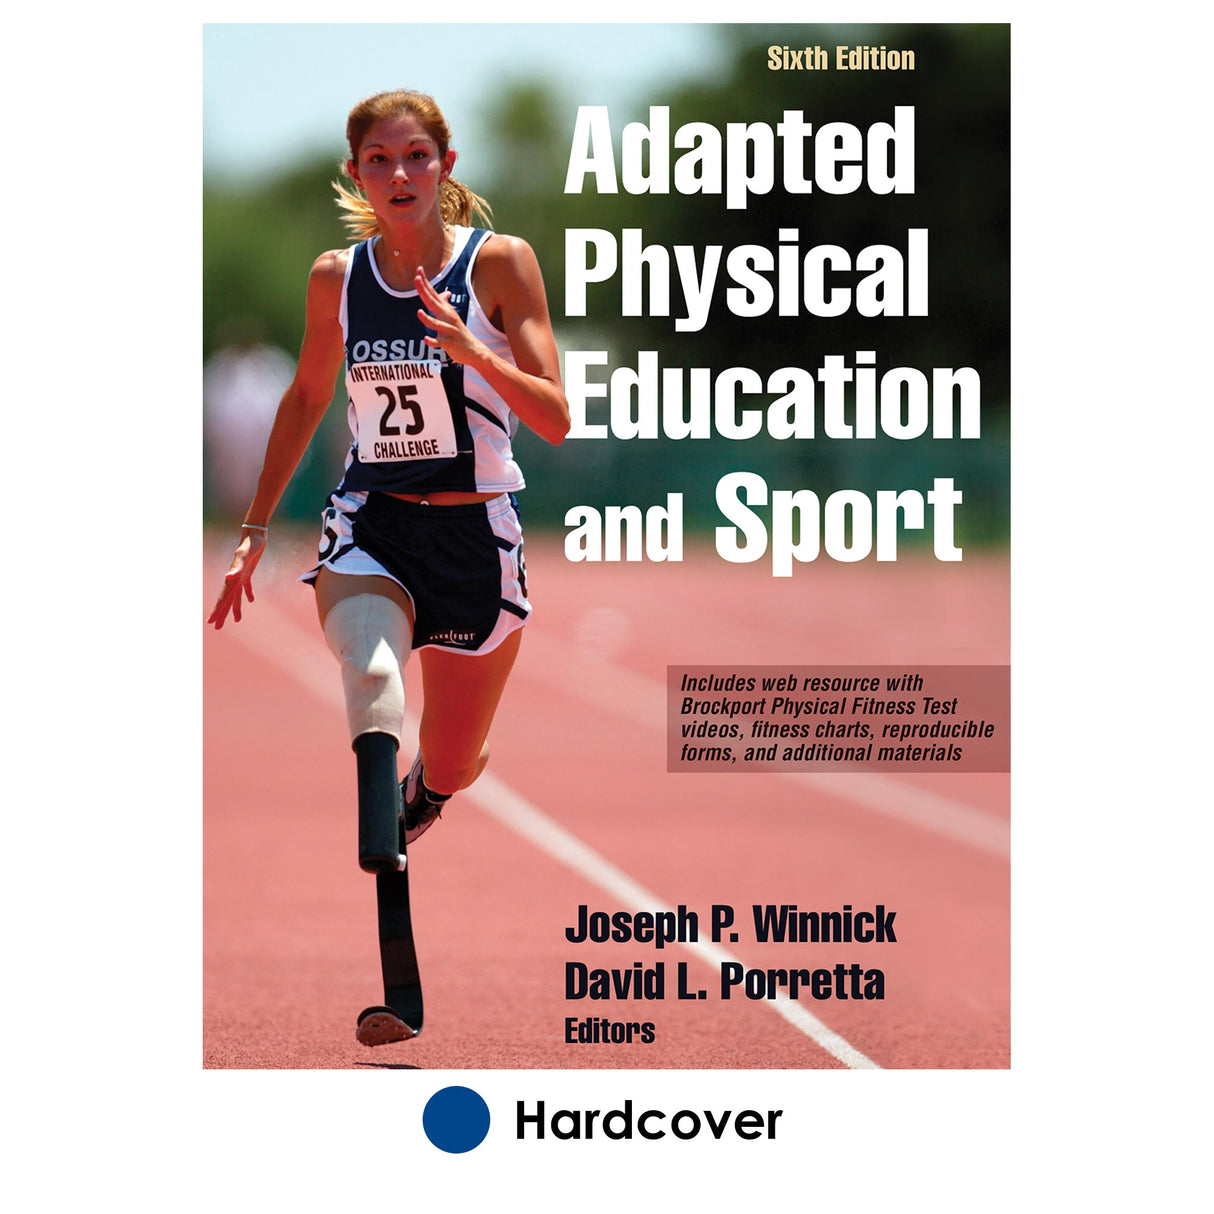 Adapted Physical Education & Sport 6th Edition With Web Resource